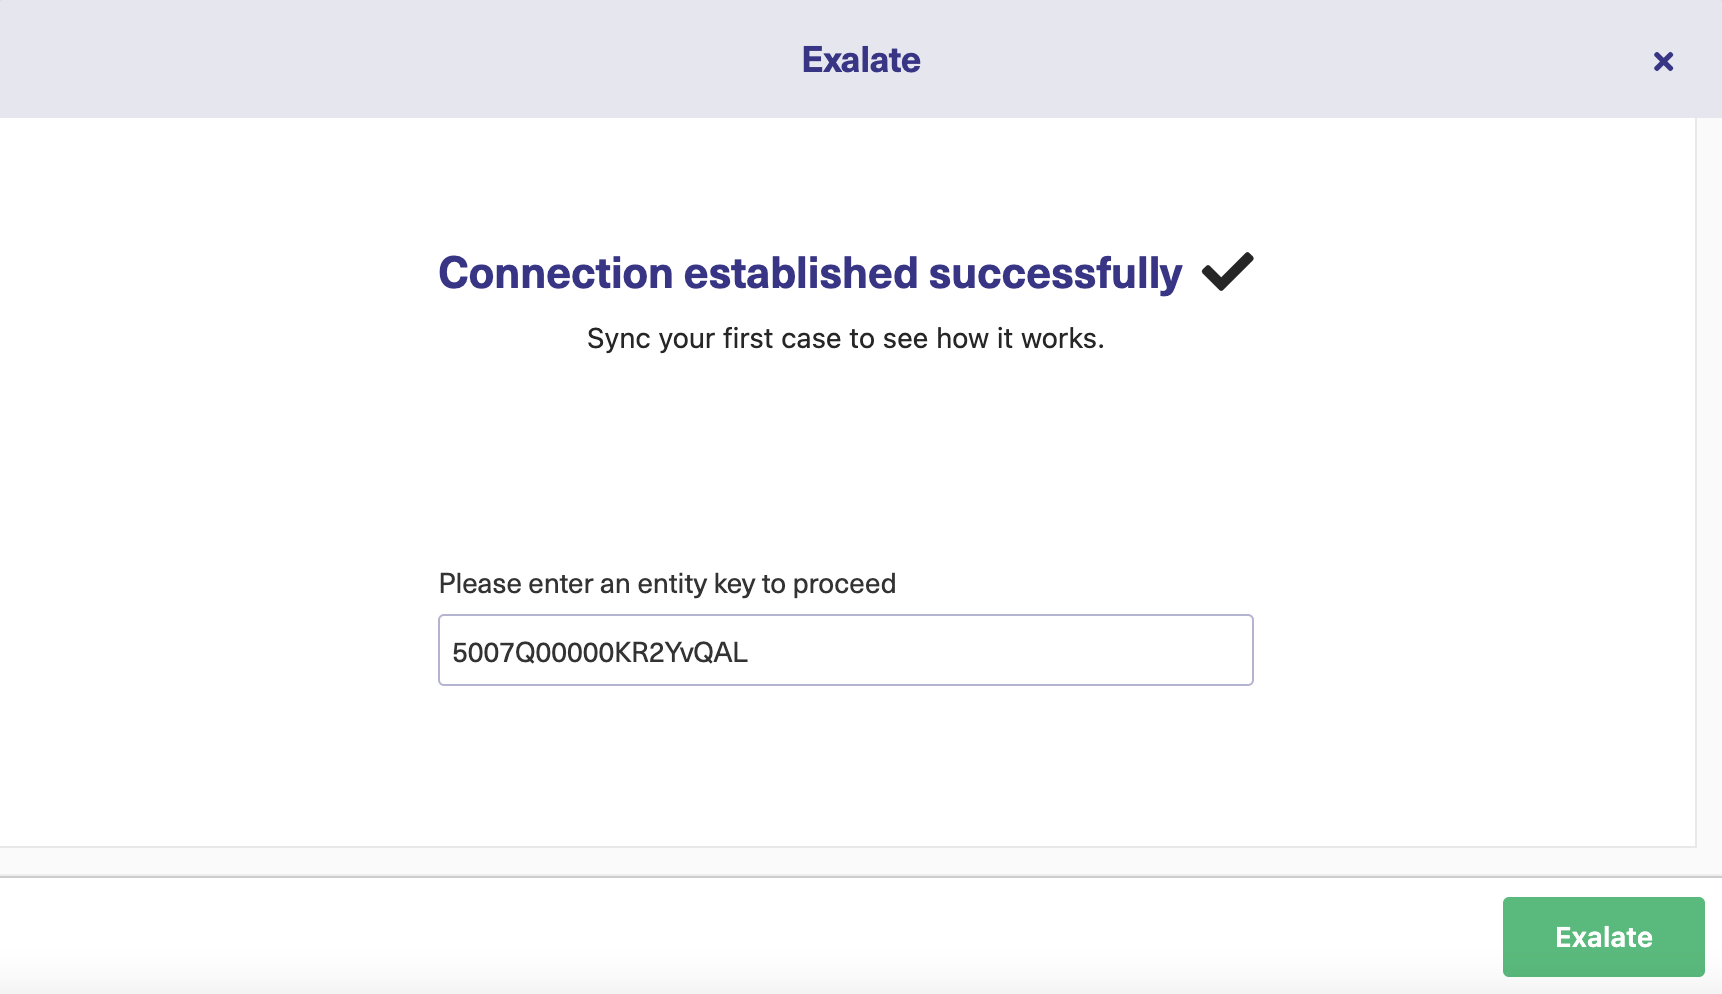 Synchronize Case with Exalate between Jira and Salesforce